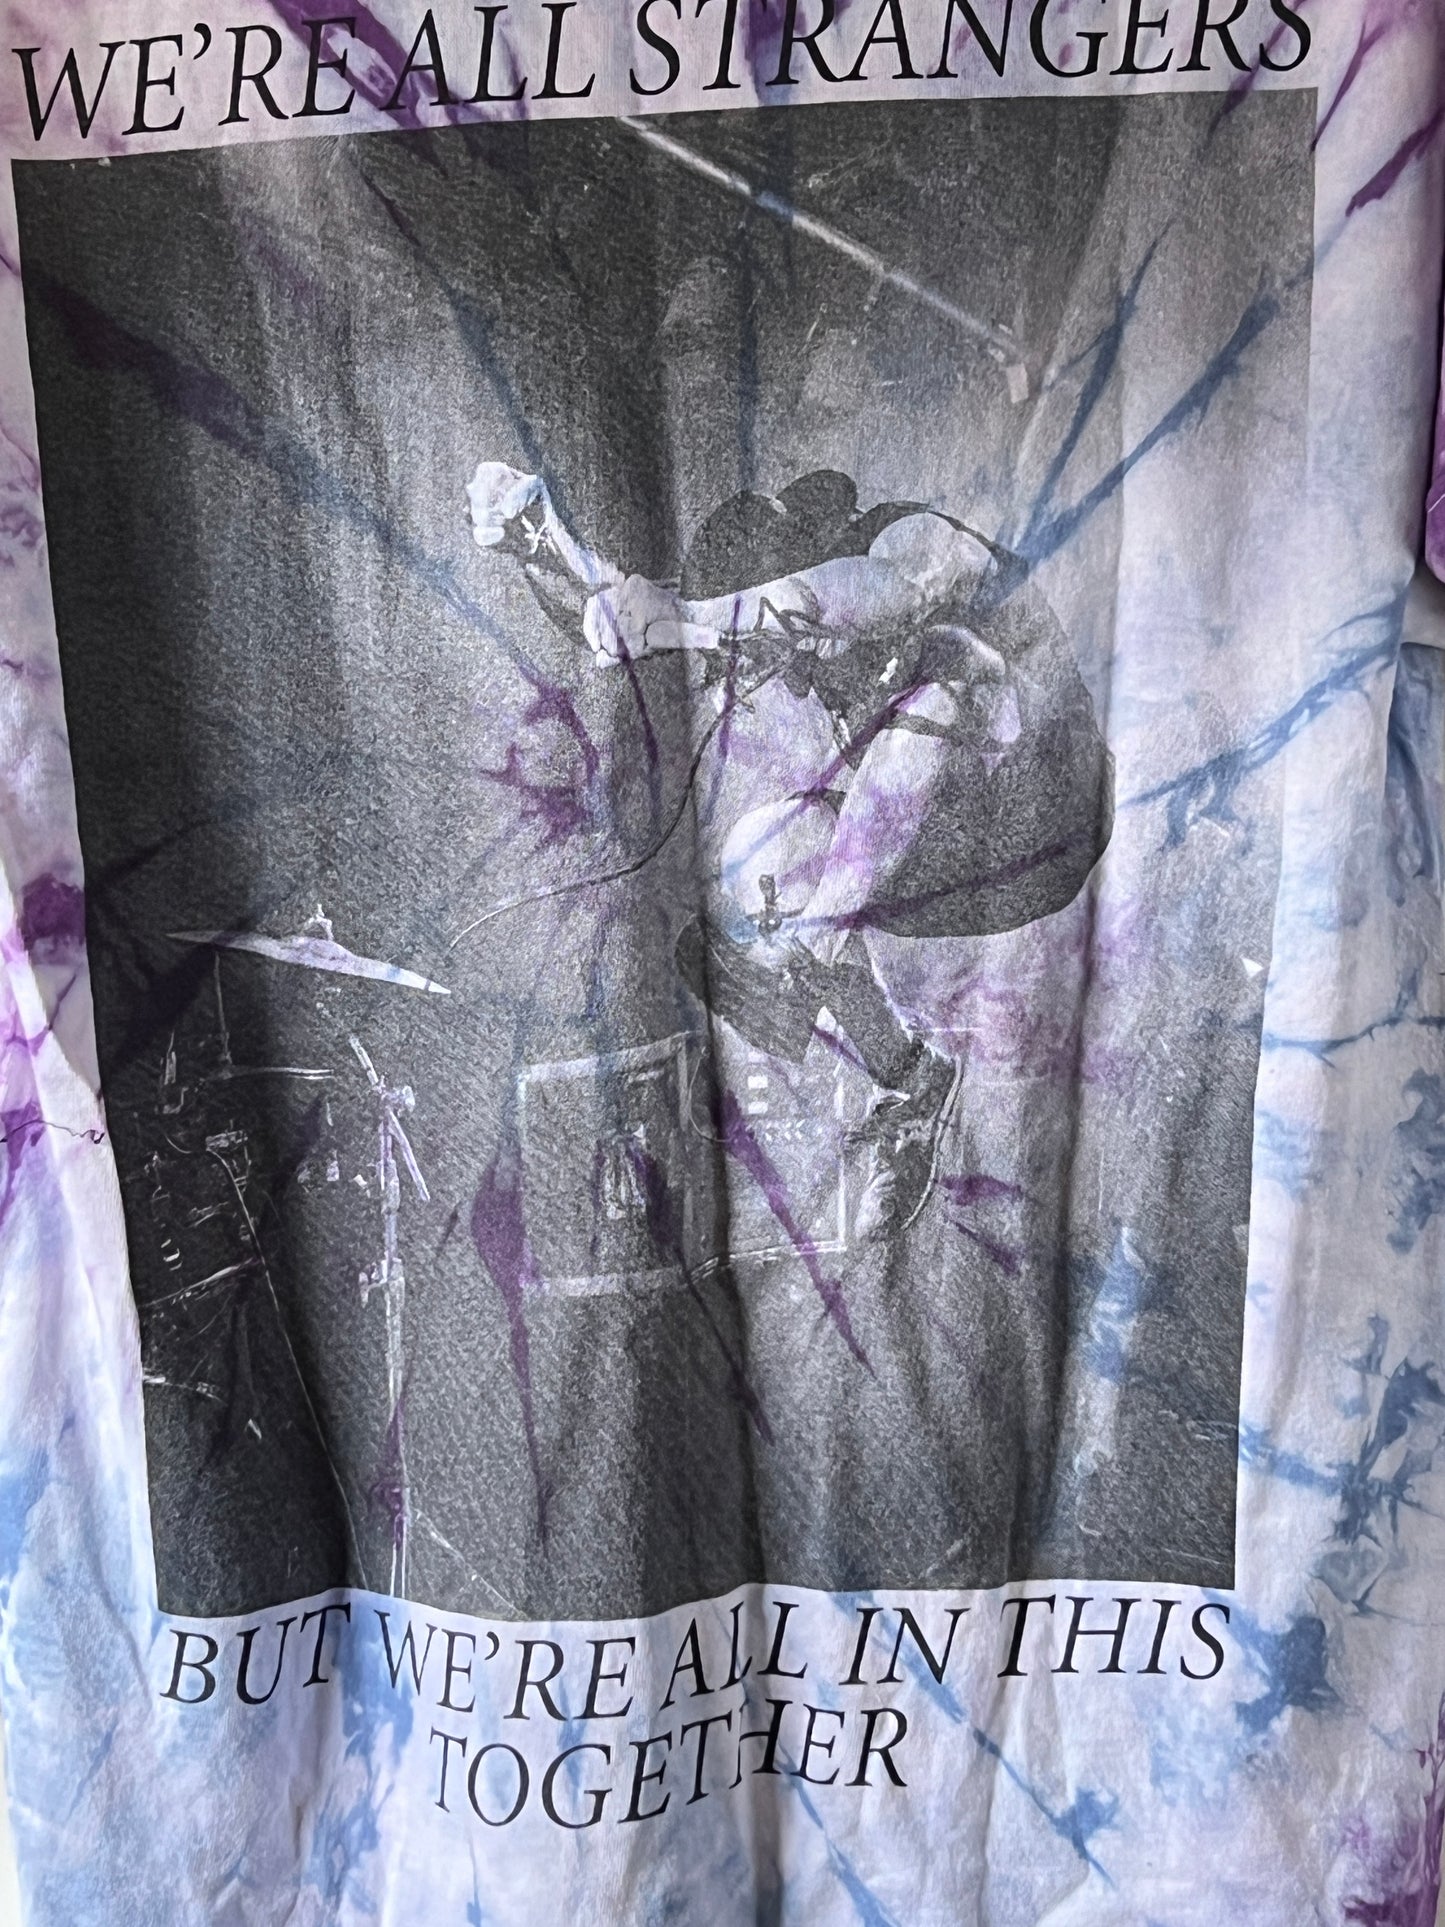 Funeral for a Friend 2014 limited edition tie dye We’re all Strangers rock band t shirt